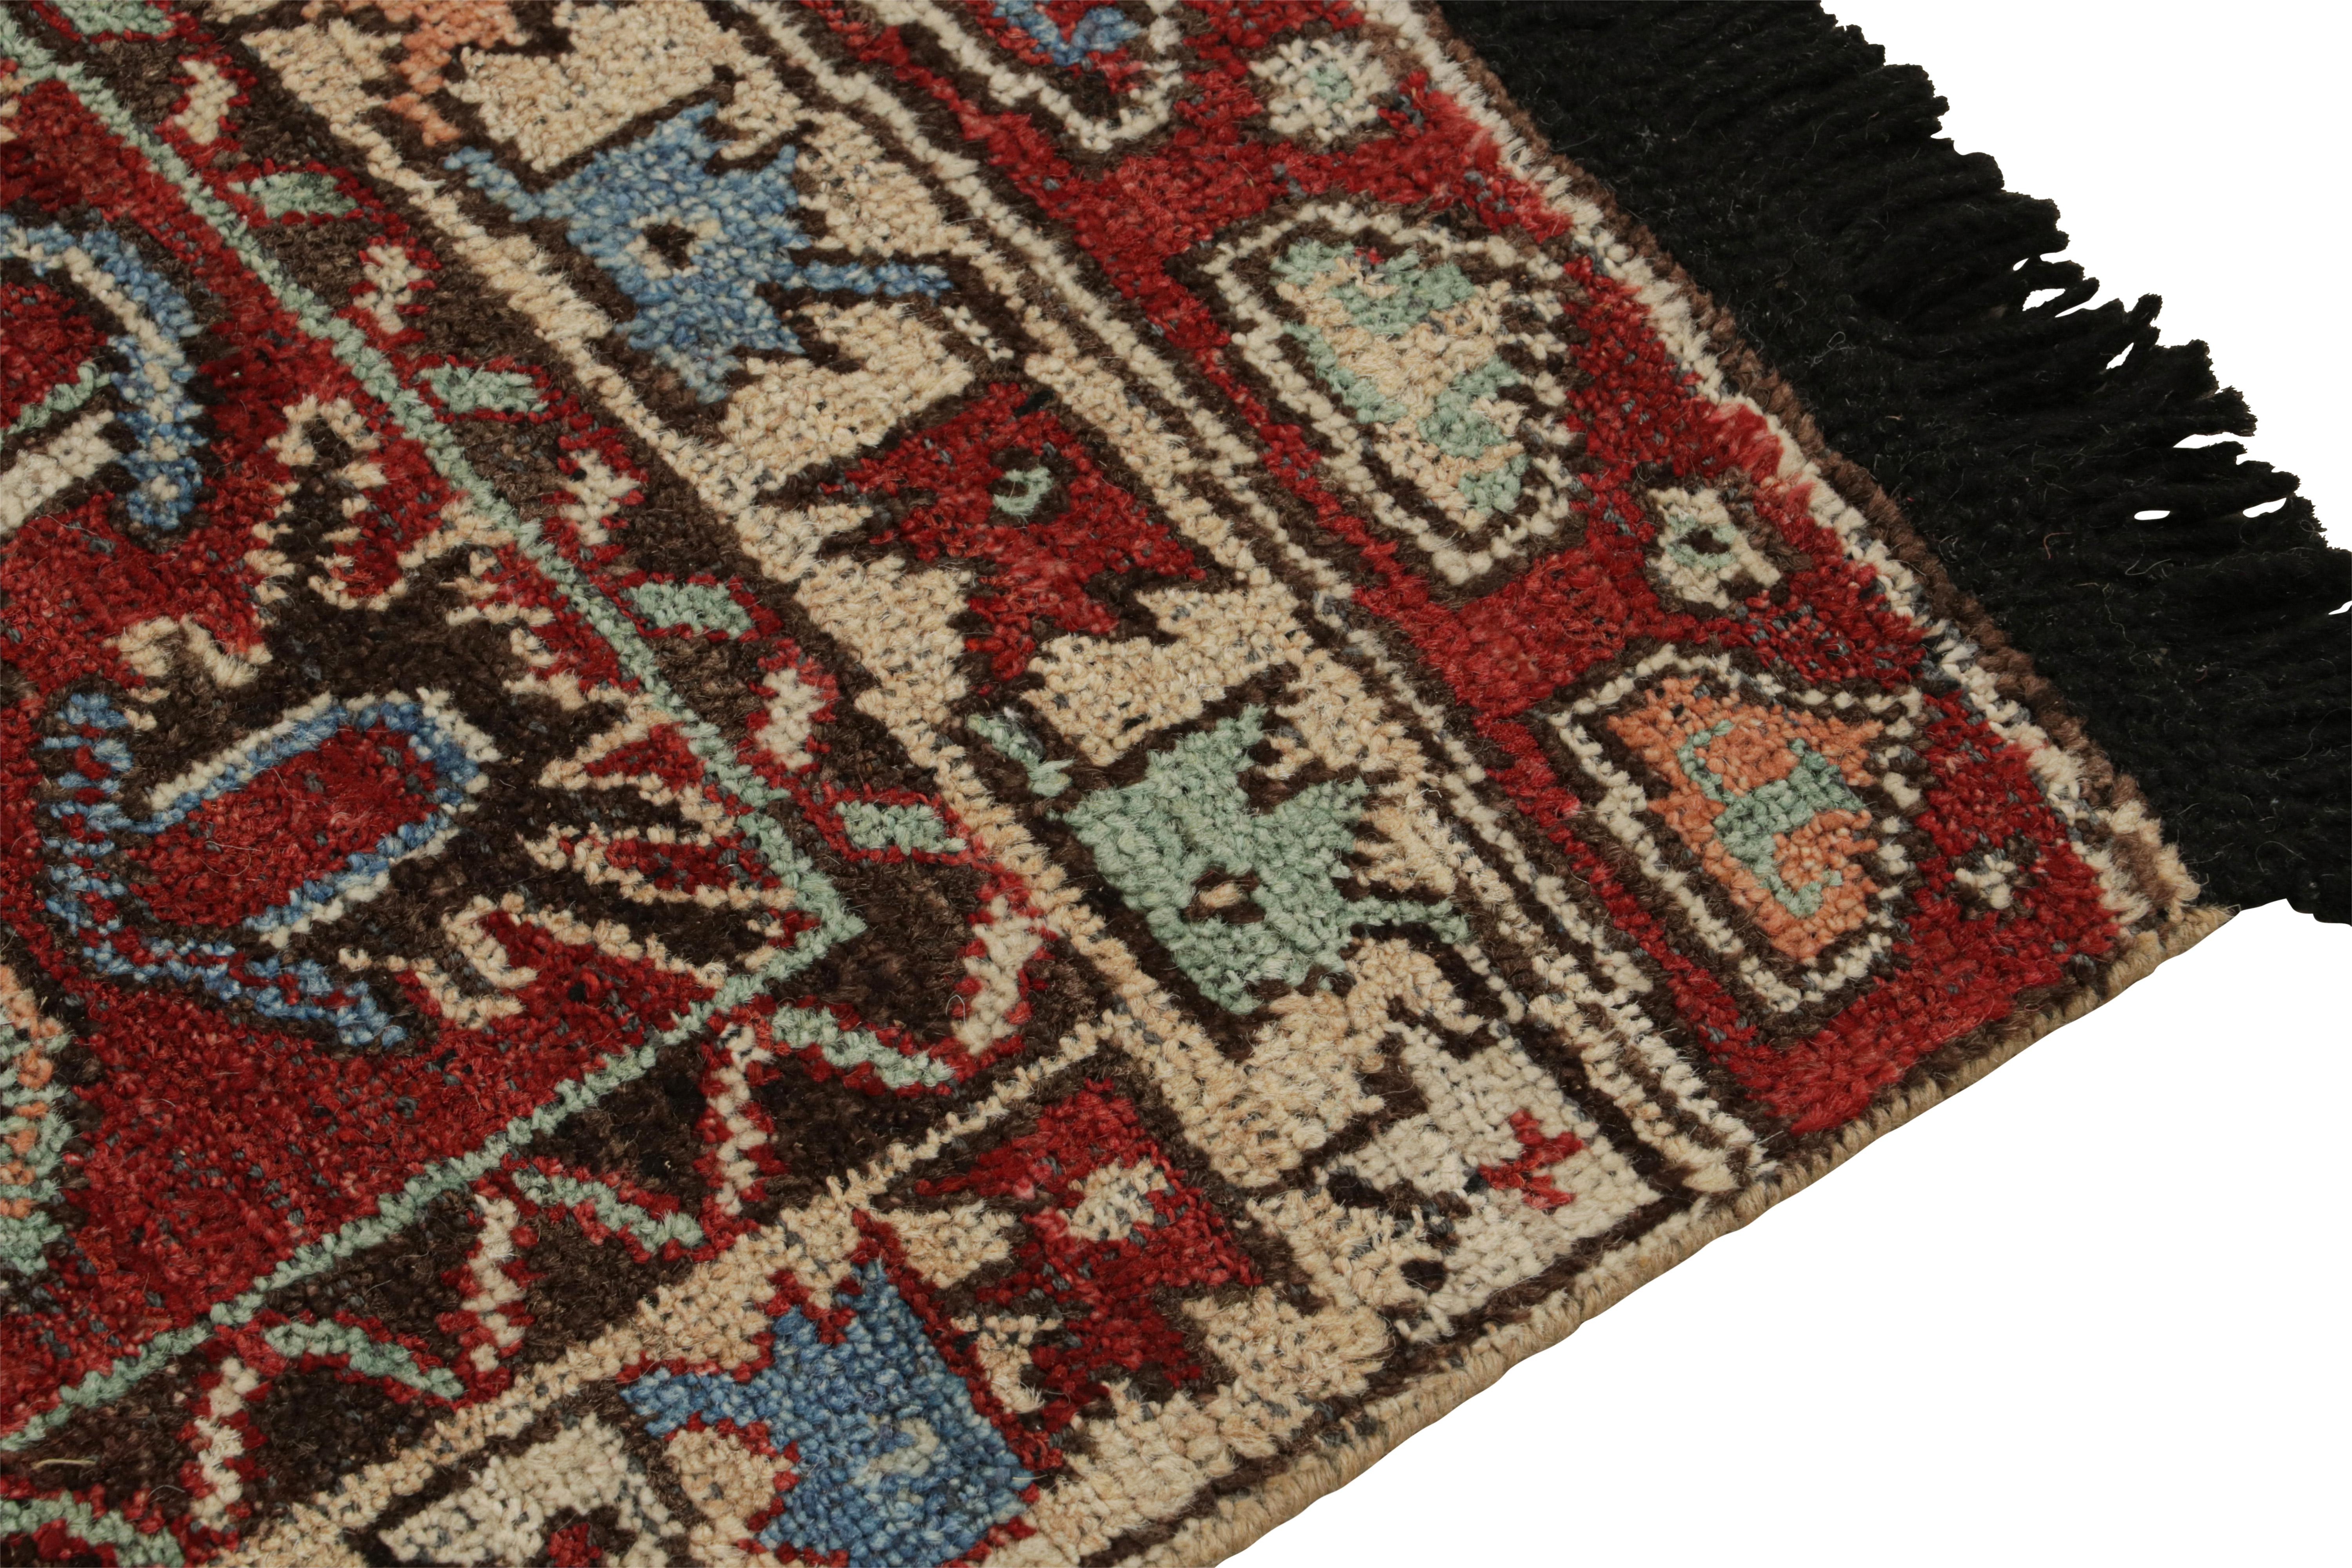 Contemporary Rug & Kilim’s Antique Tribal Style Rug in Red, Blue, Green & Black Patterns For Sale